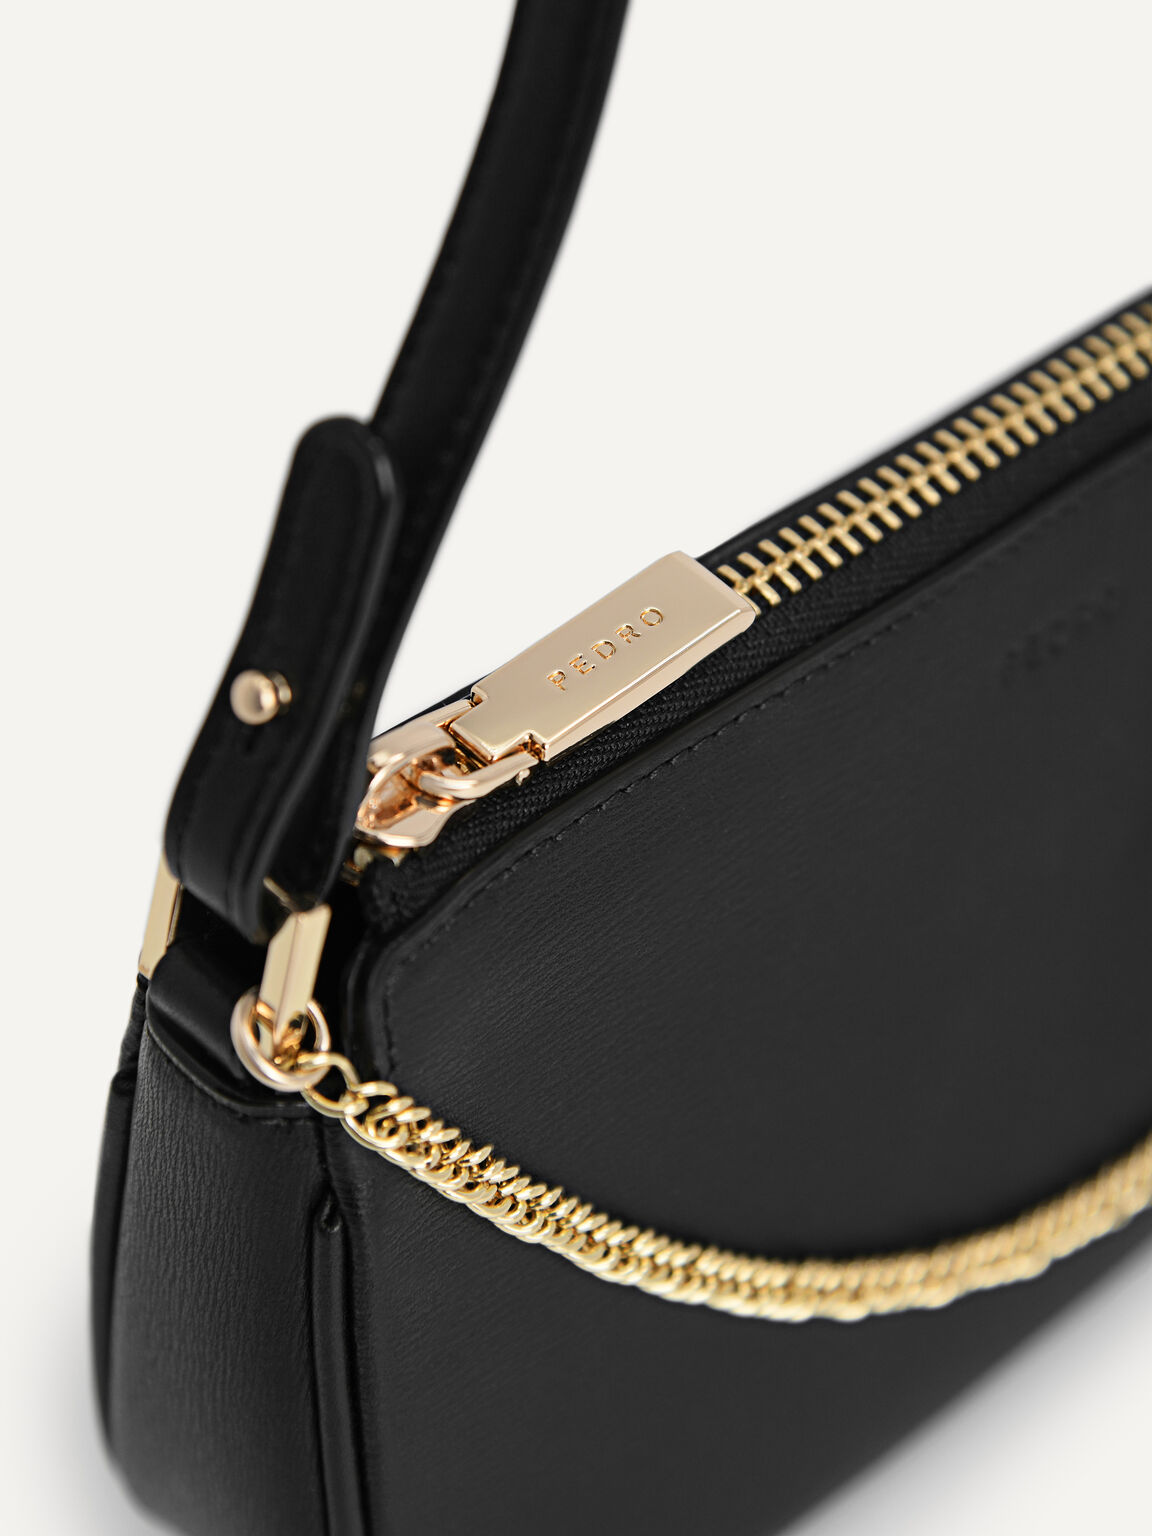 TÚI XÁCH PEDRO MADDY LEATHER CHAIN DETAILED SHOULDER BAG 13